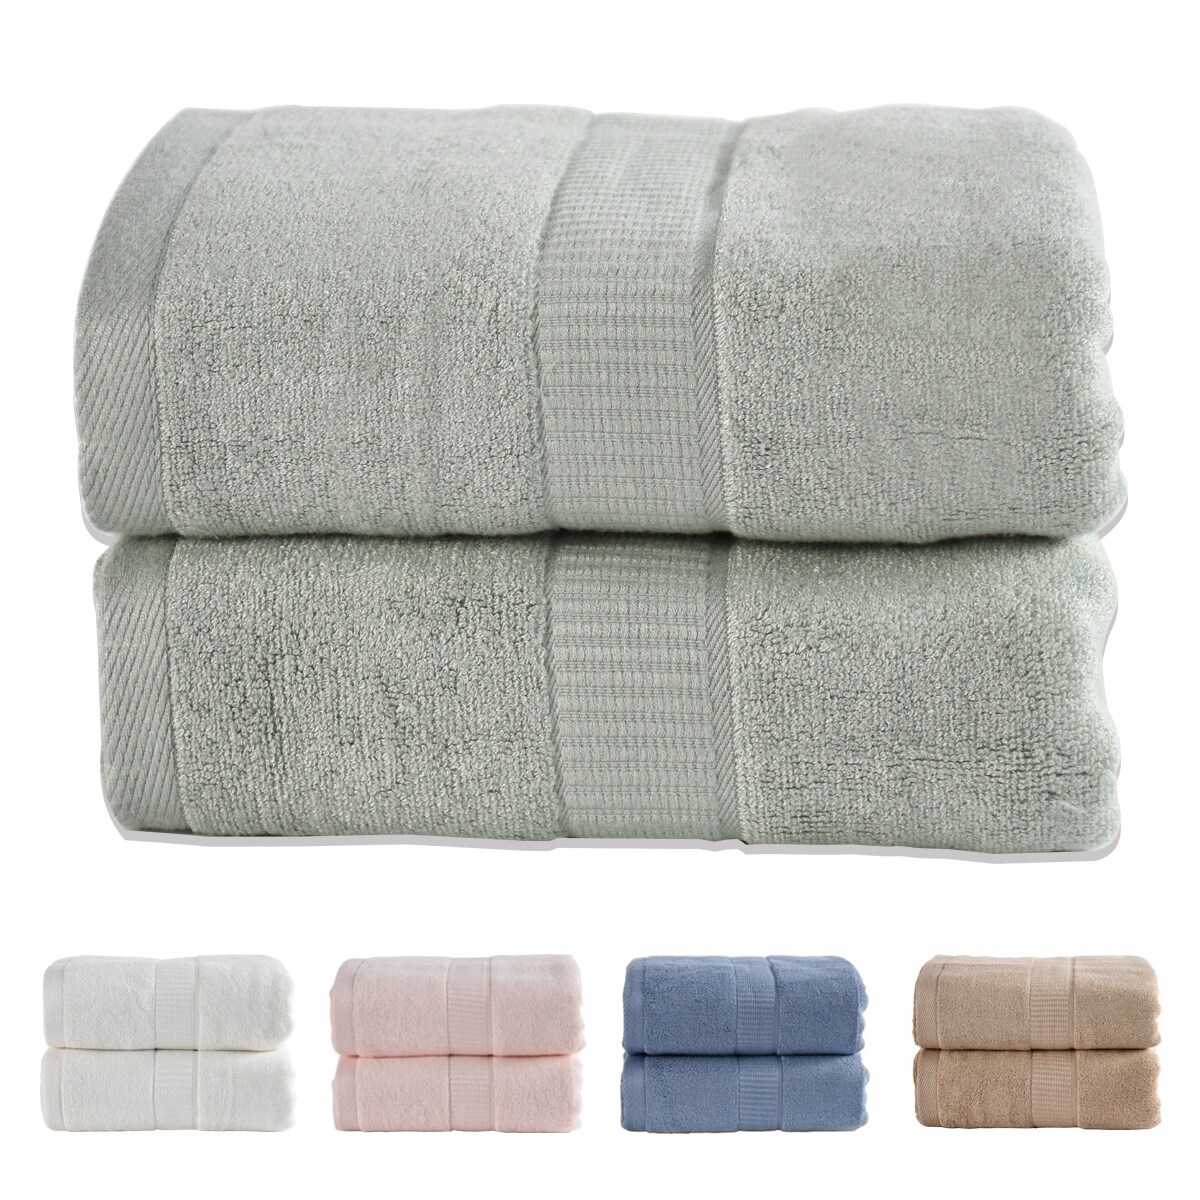 2 Pack Premium Cotton Bath Towels With Gift Box - On Sale - Bed Bath &  Beyond - 31989575